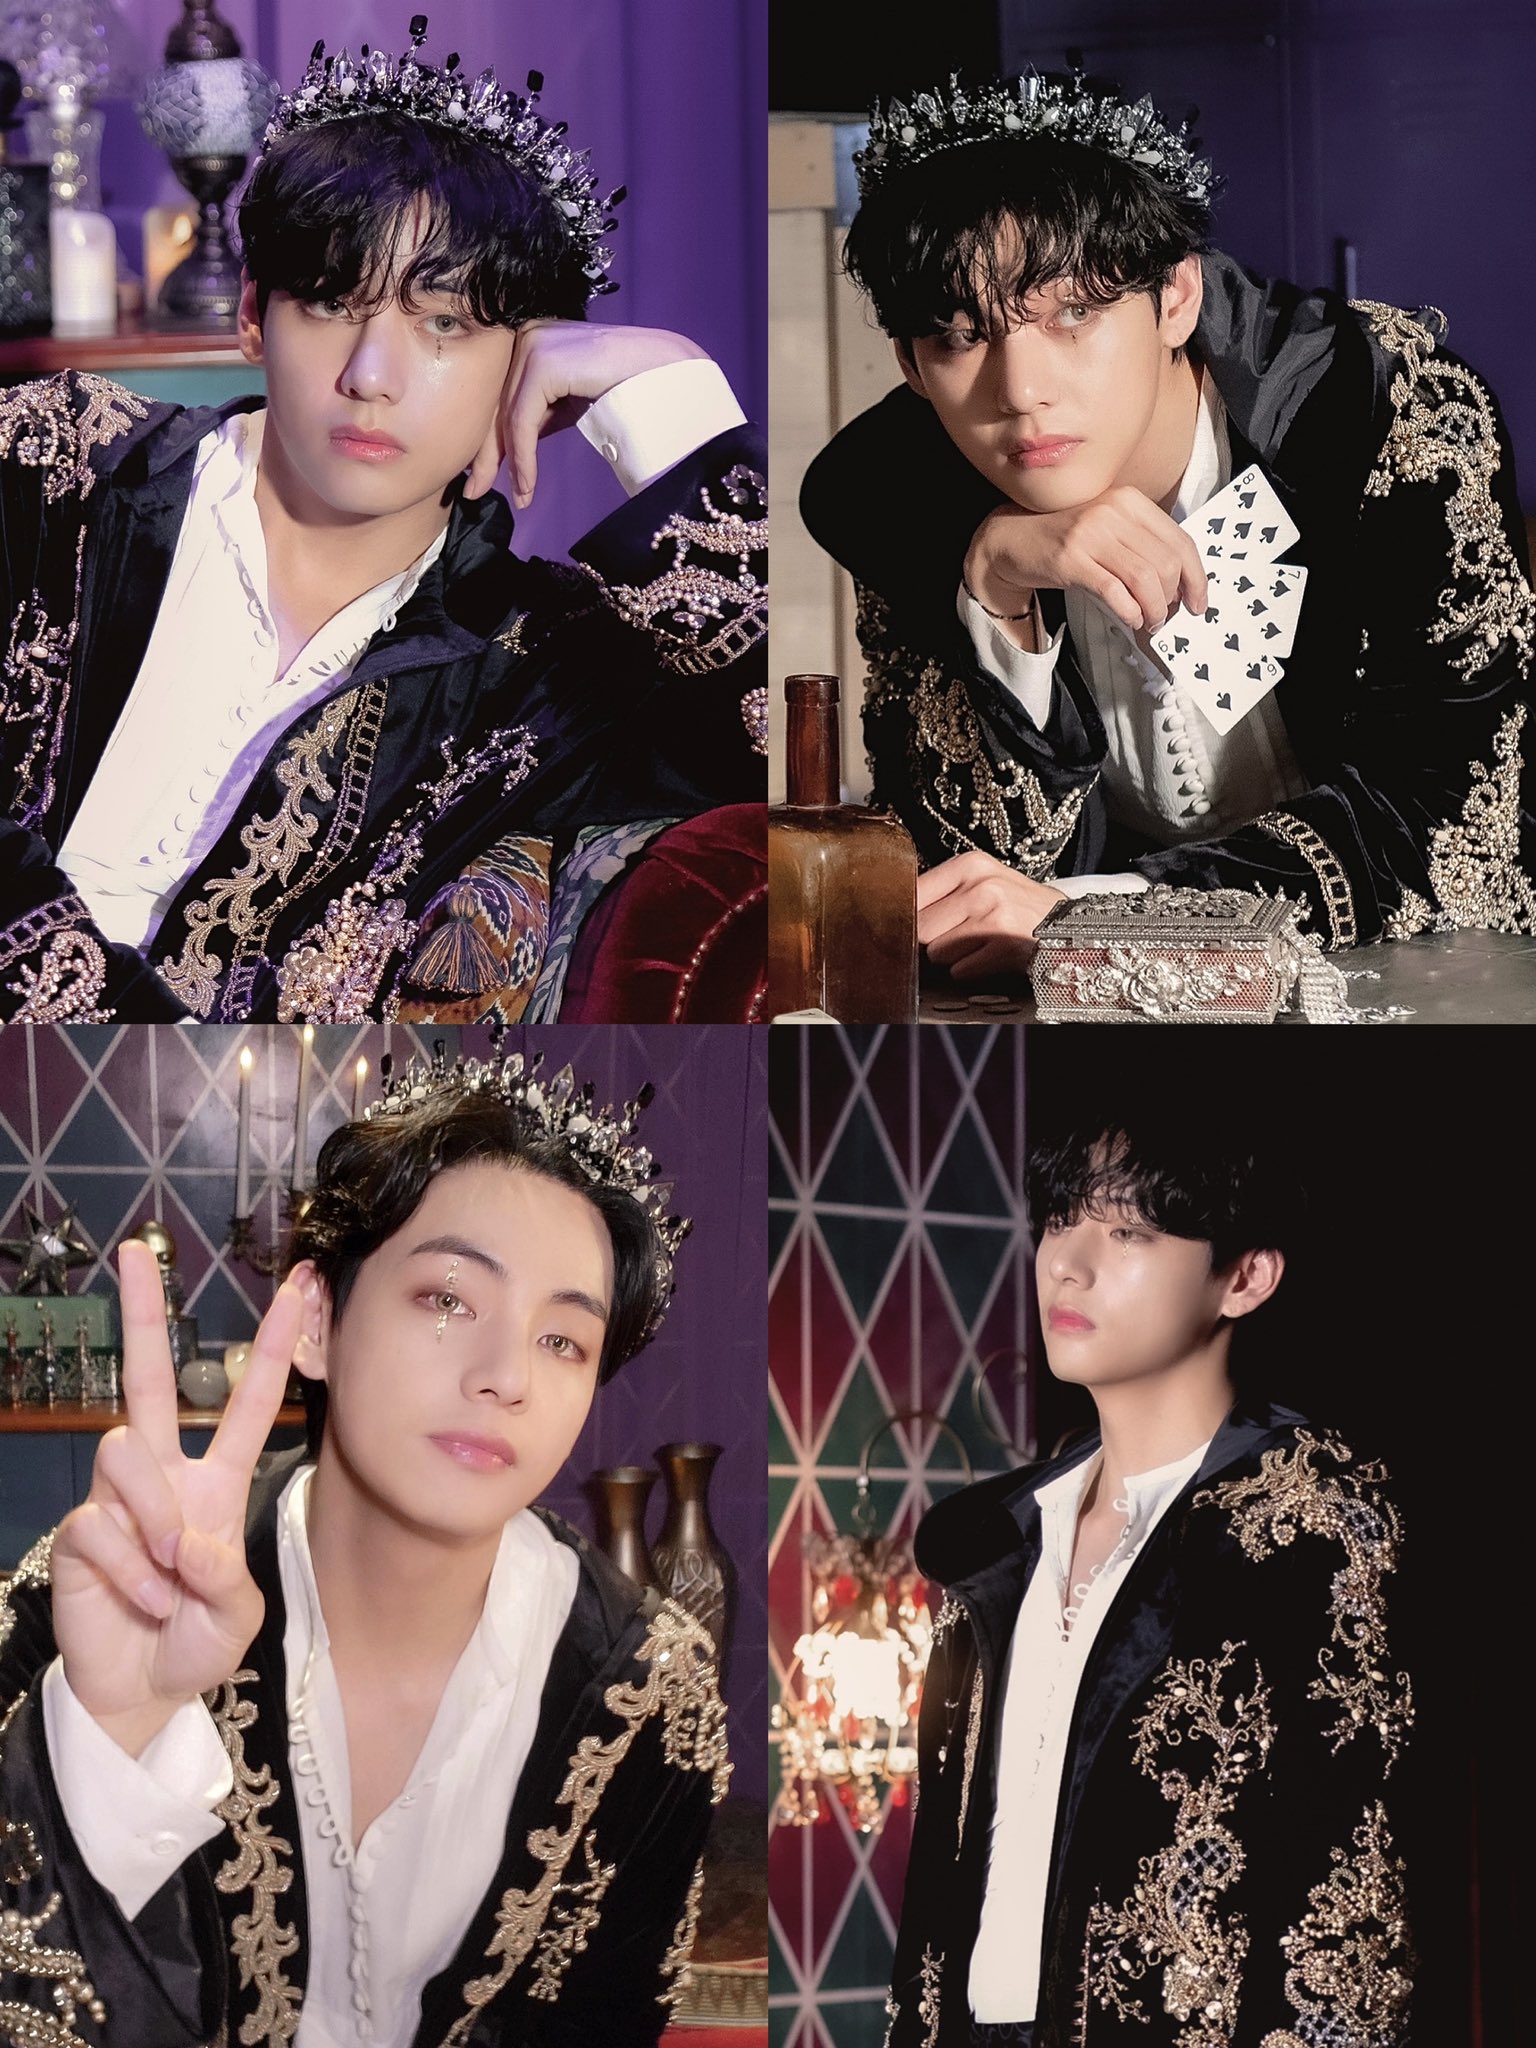 Kim Taehyung's Visuals Are Unparalleled